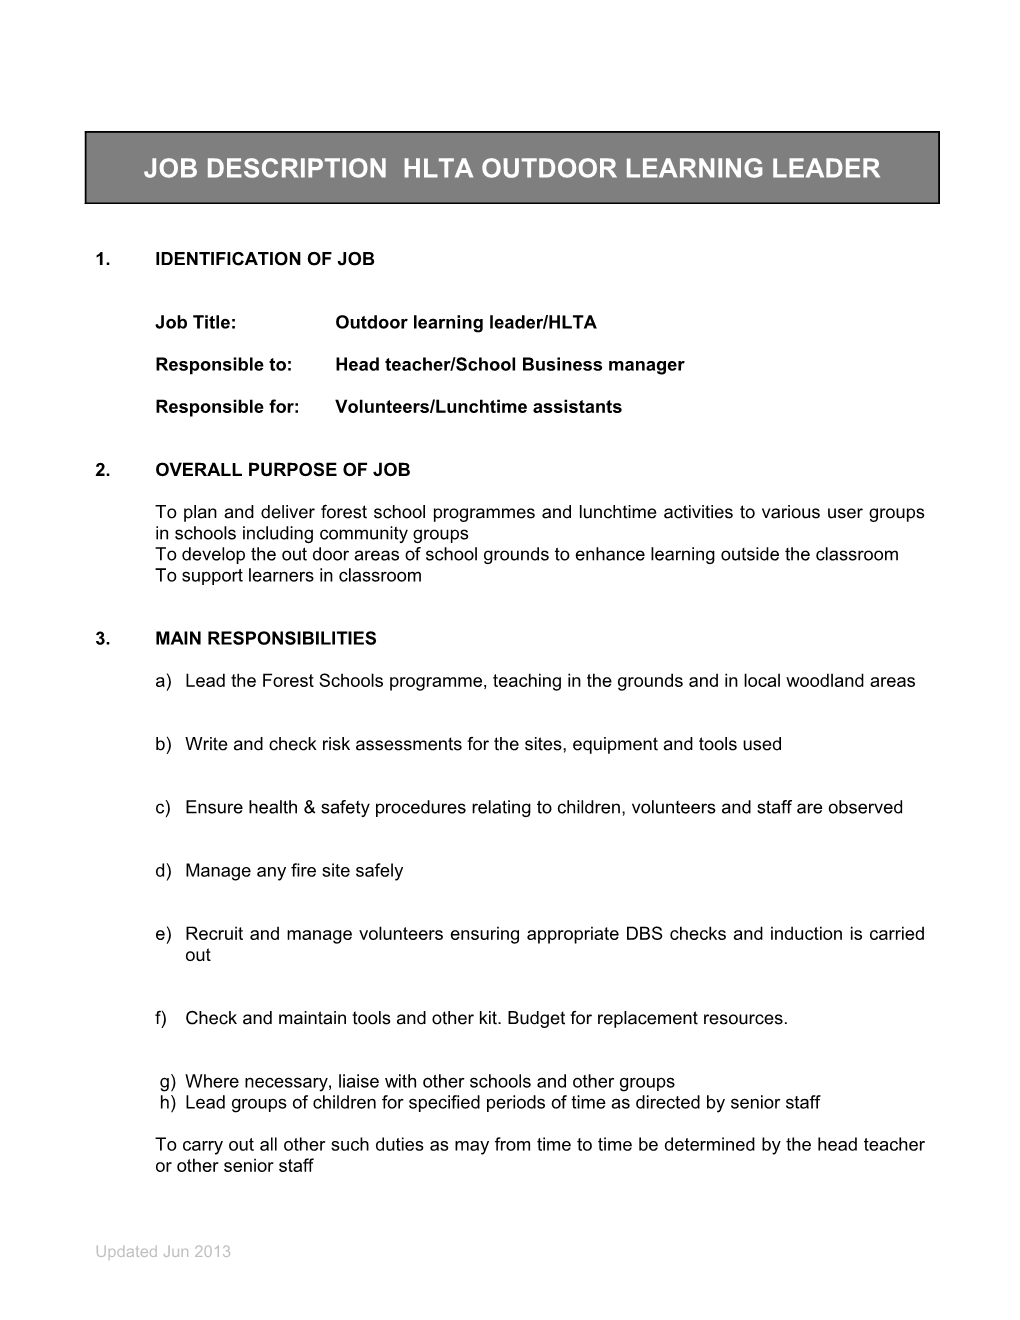 Job Title: Outdoor Learning Leader/HLTA